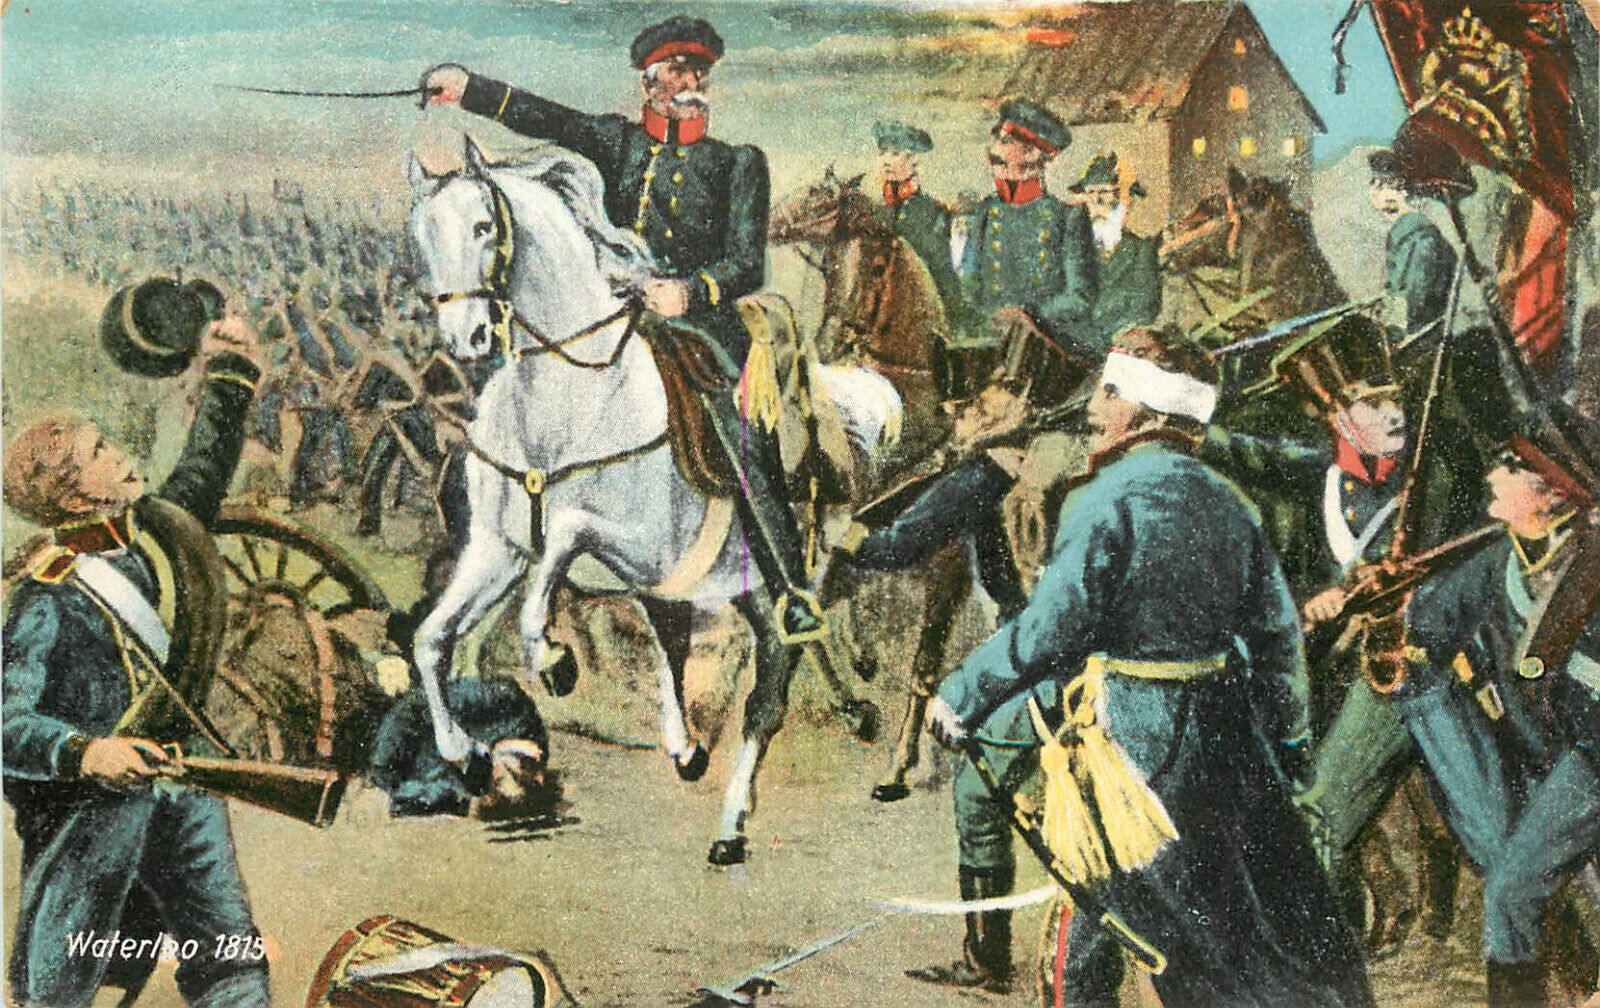 Vintage Postcard Depicting Marshall Blucher in The Battle of Waterloo 1815